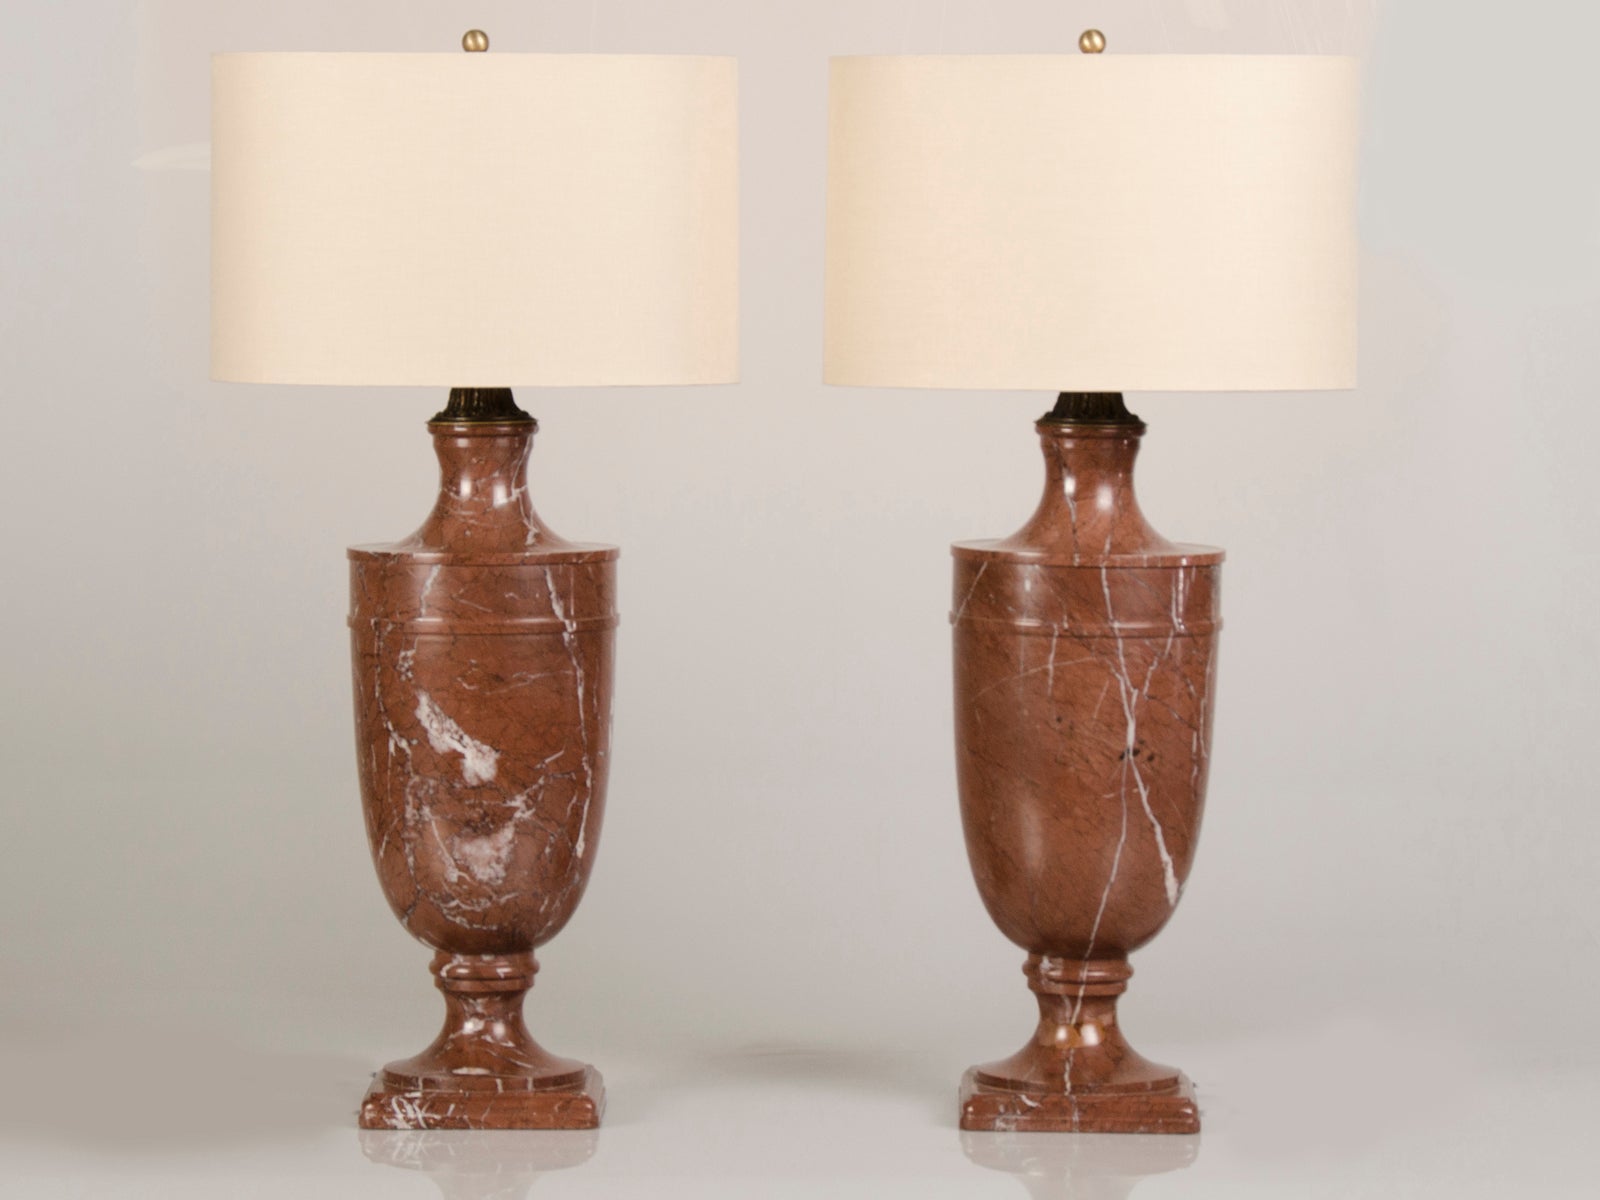 Pair of Antique Italian Neoclassical Marble Urn Lamps, circa 1890 For Sale